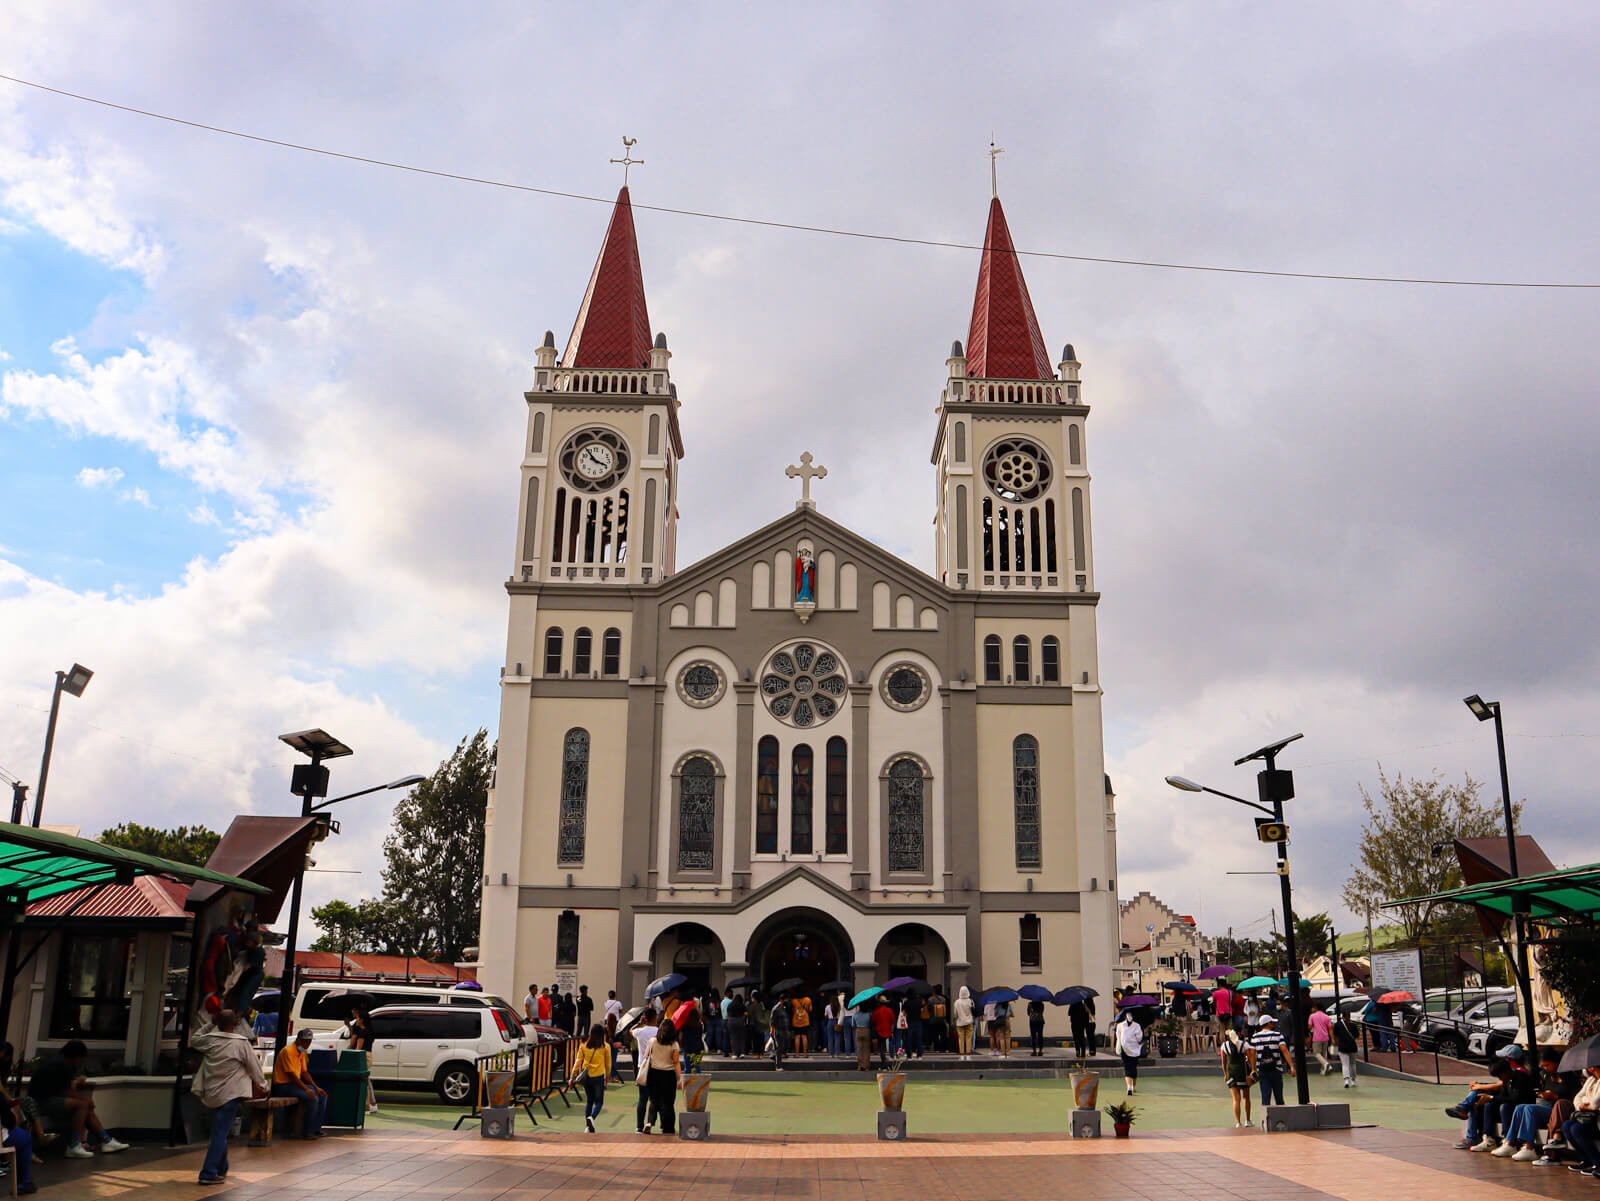 The Baguio Cathedral of Our Lady of the Atonement – Baguio, Benguet, Philippines